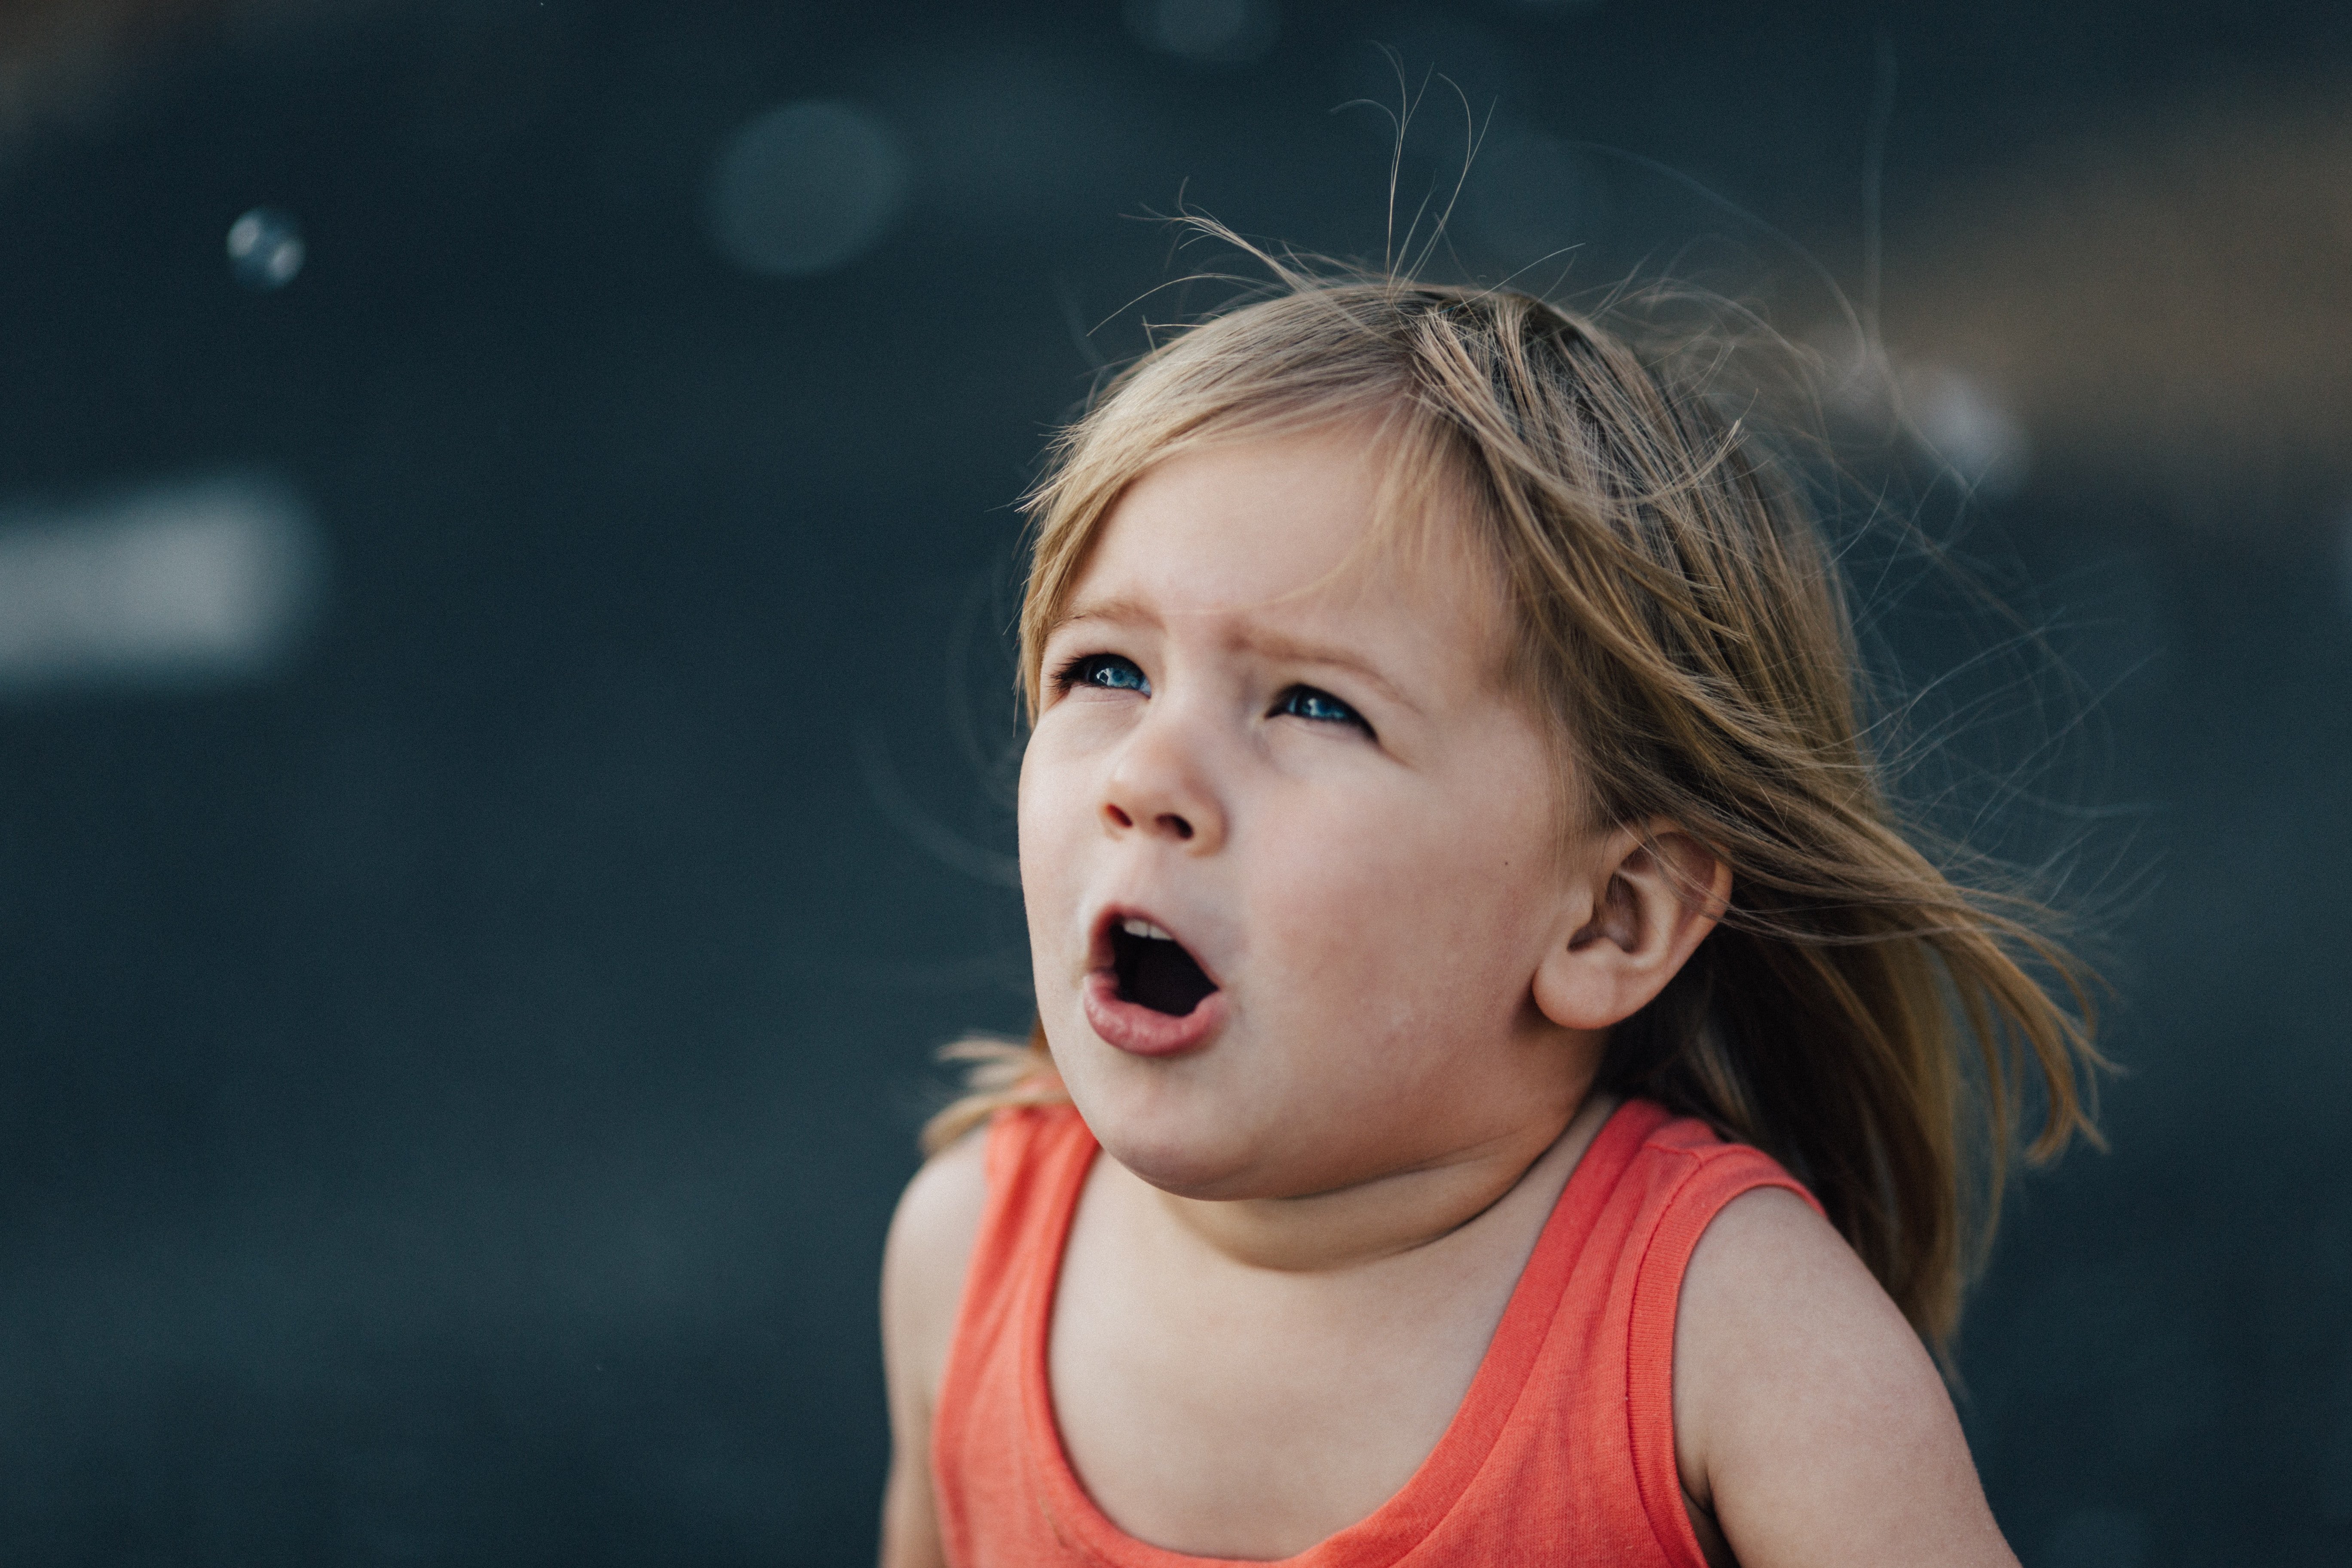 Little girl about to shout | Source: Unsplash.com